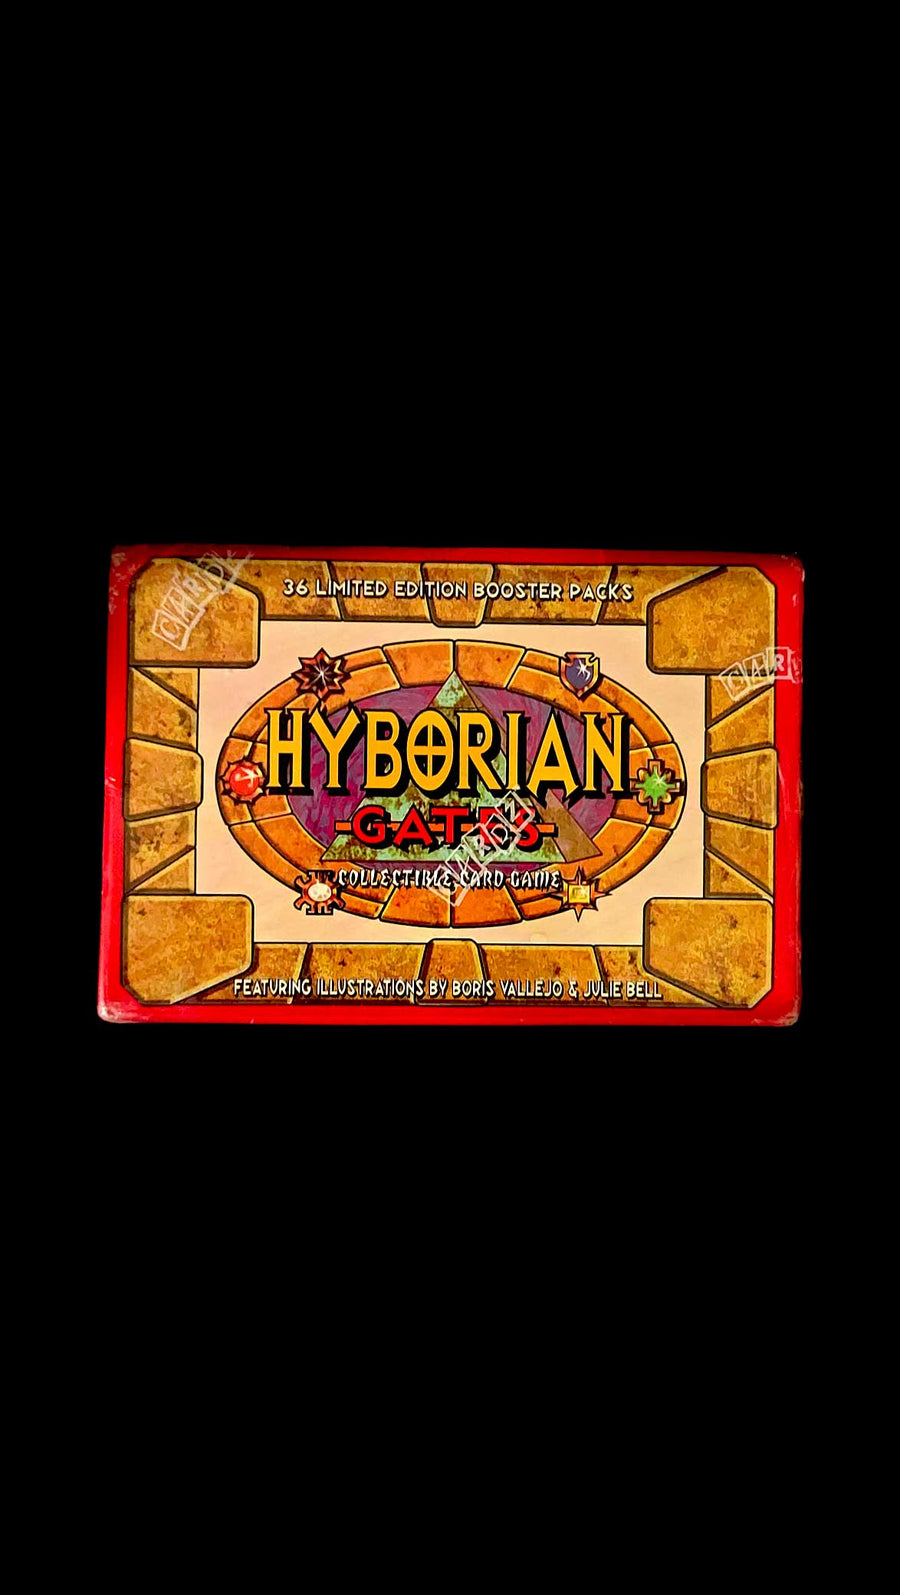 Hyborian-Gates-Collectible-Card-Game-Limited-Edition-Booster-Packs